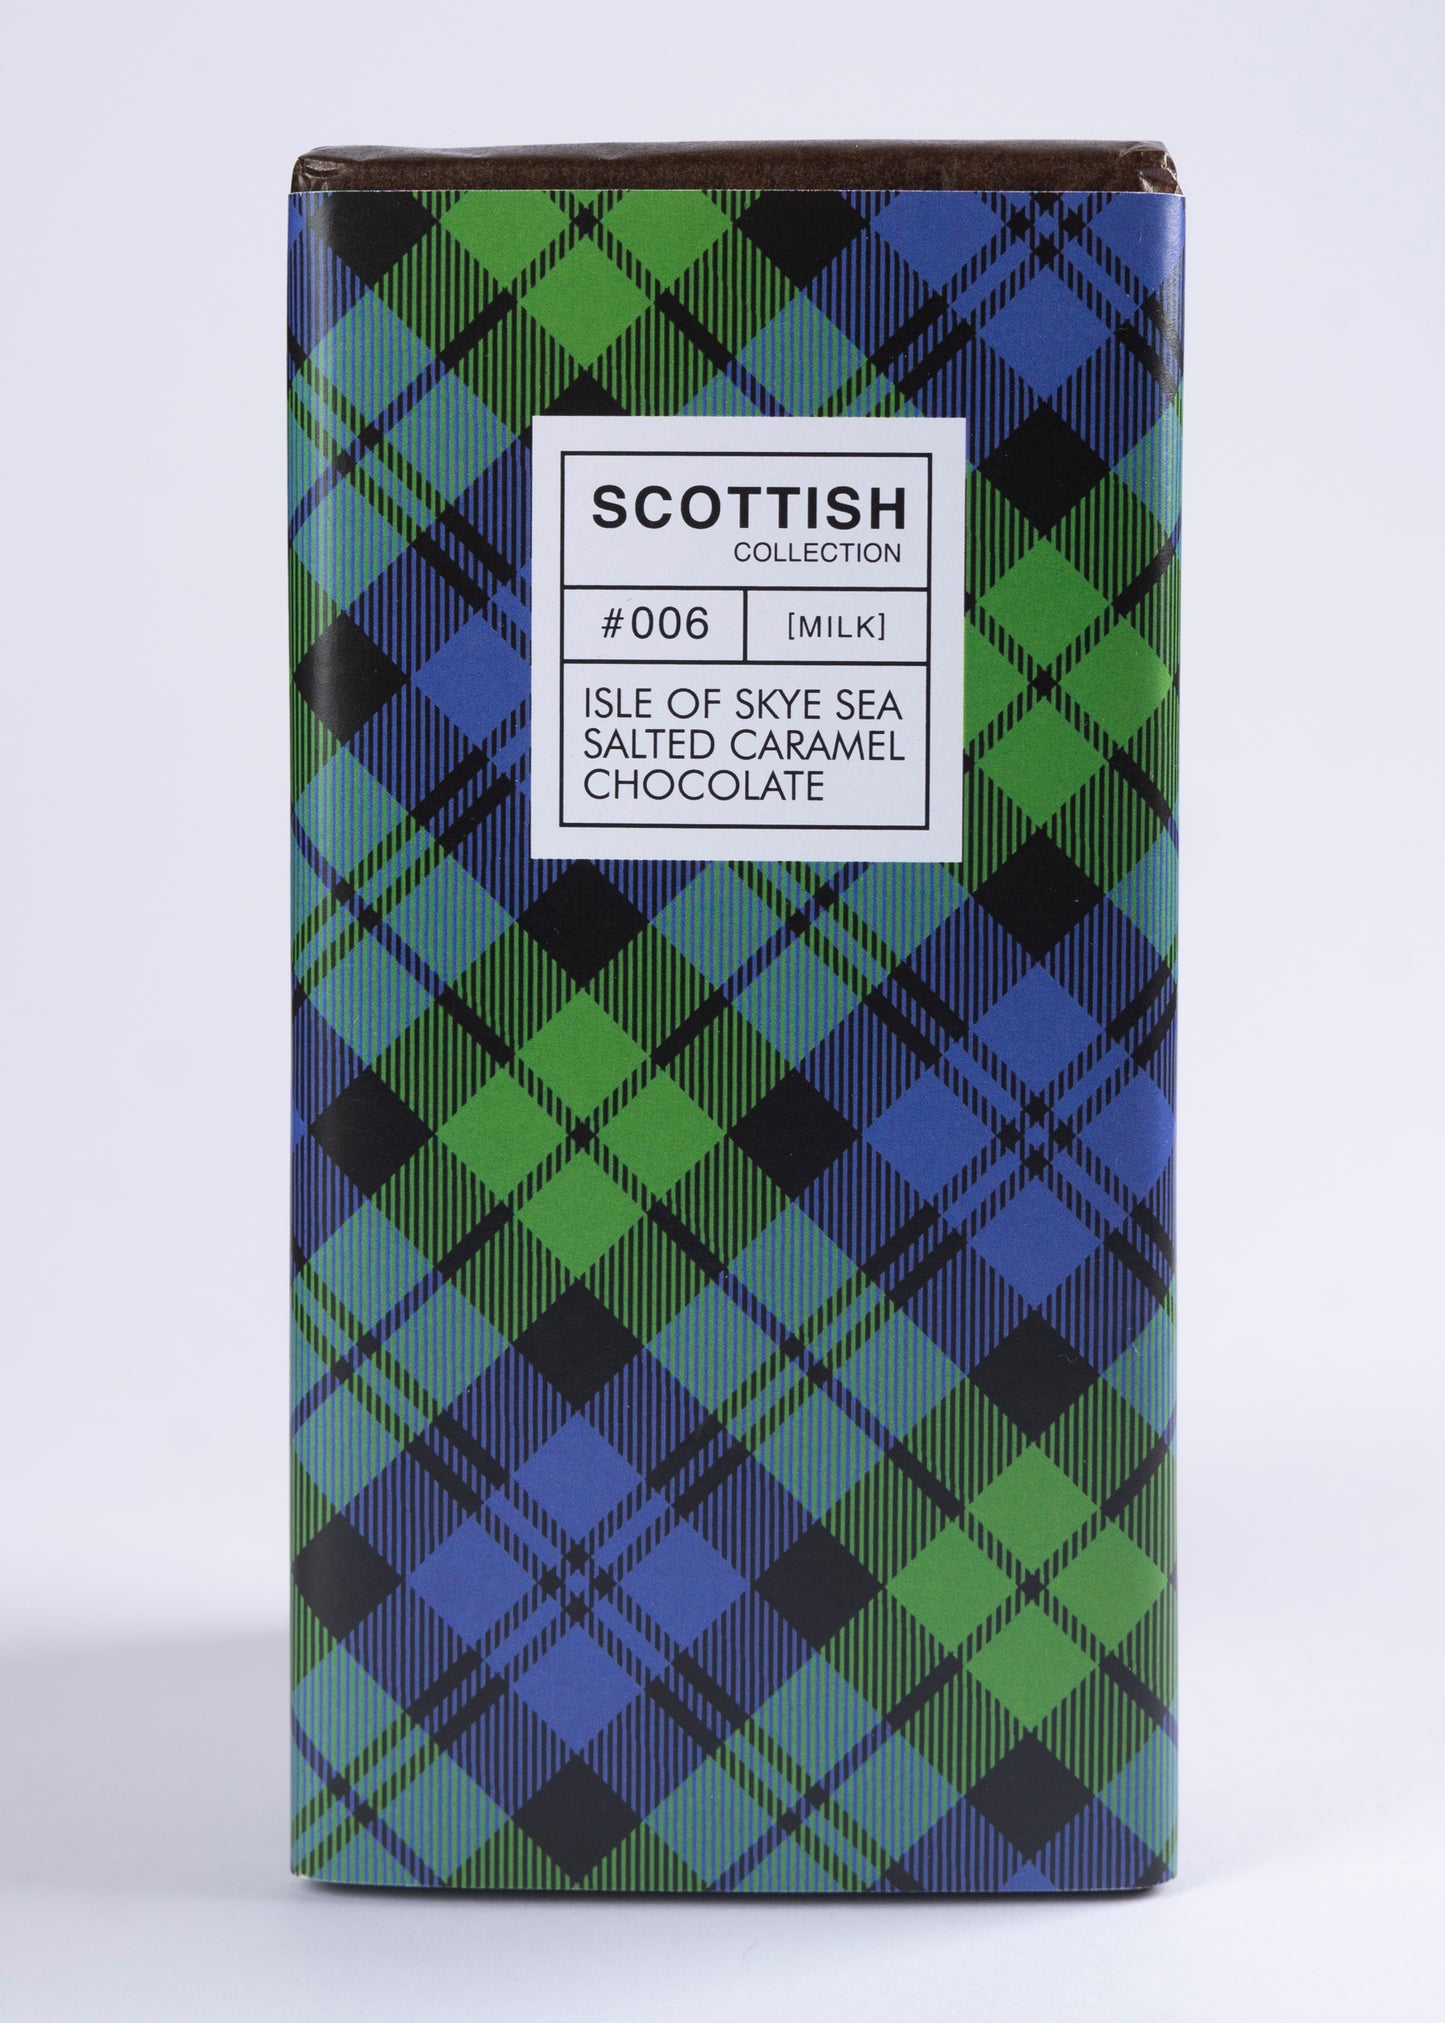 Quirky Chocolate Co Scottish Collection Isle of Skye Sea Salted Caramel Chocolate